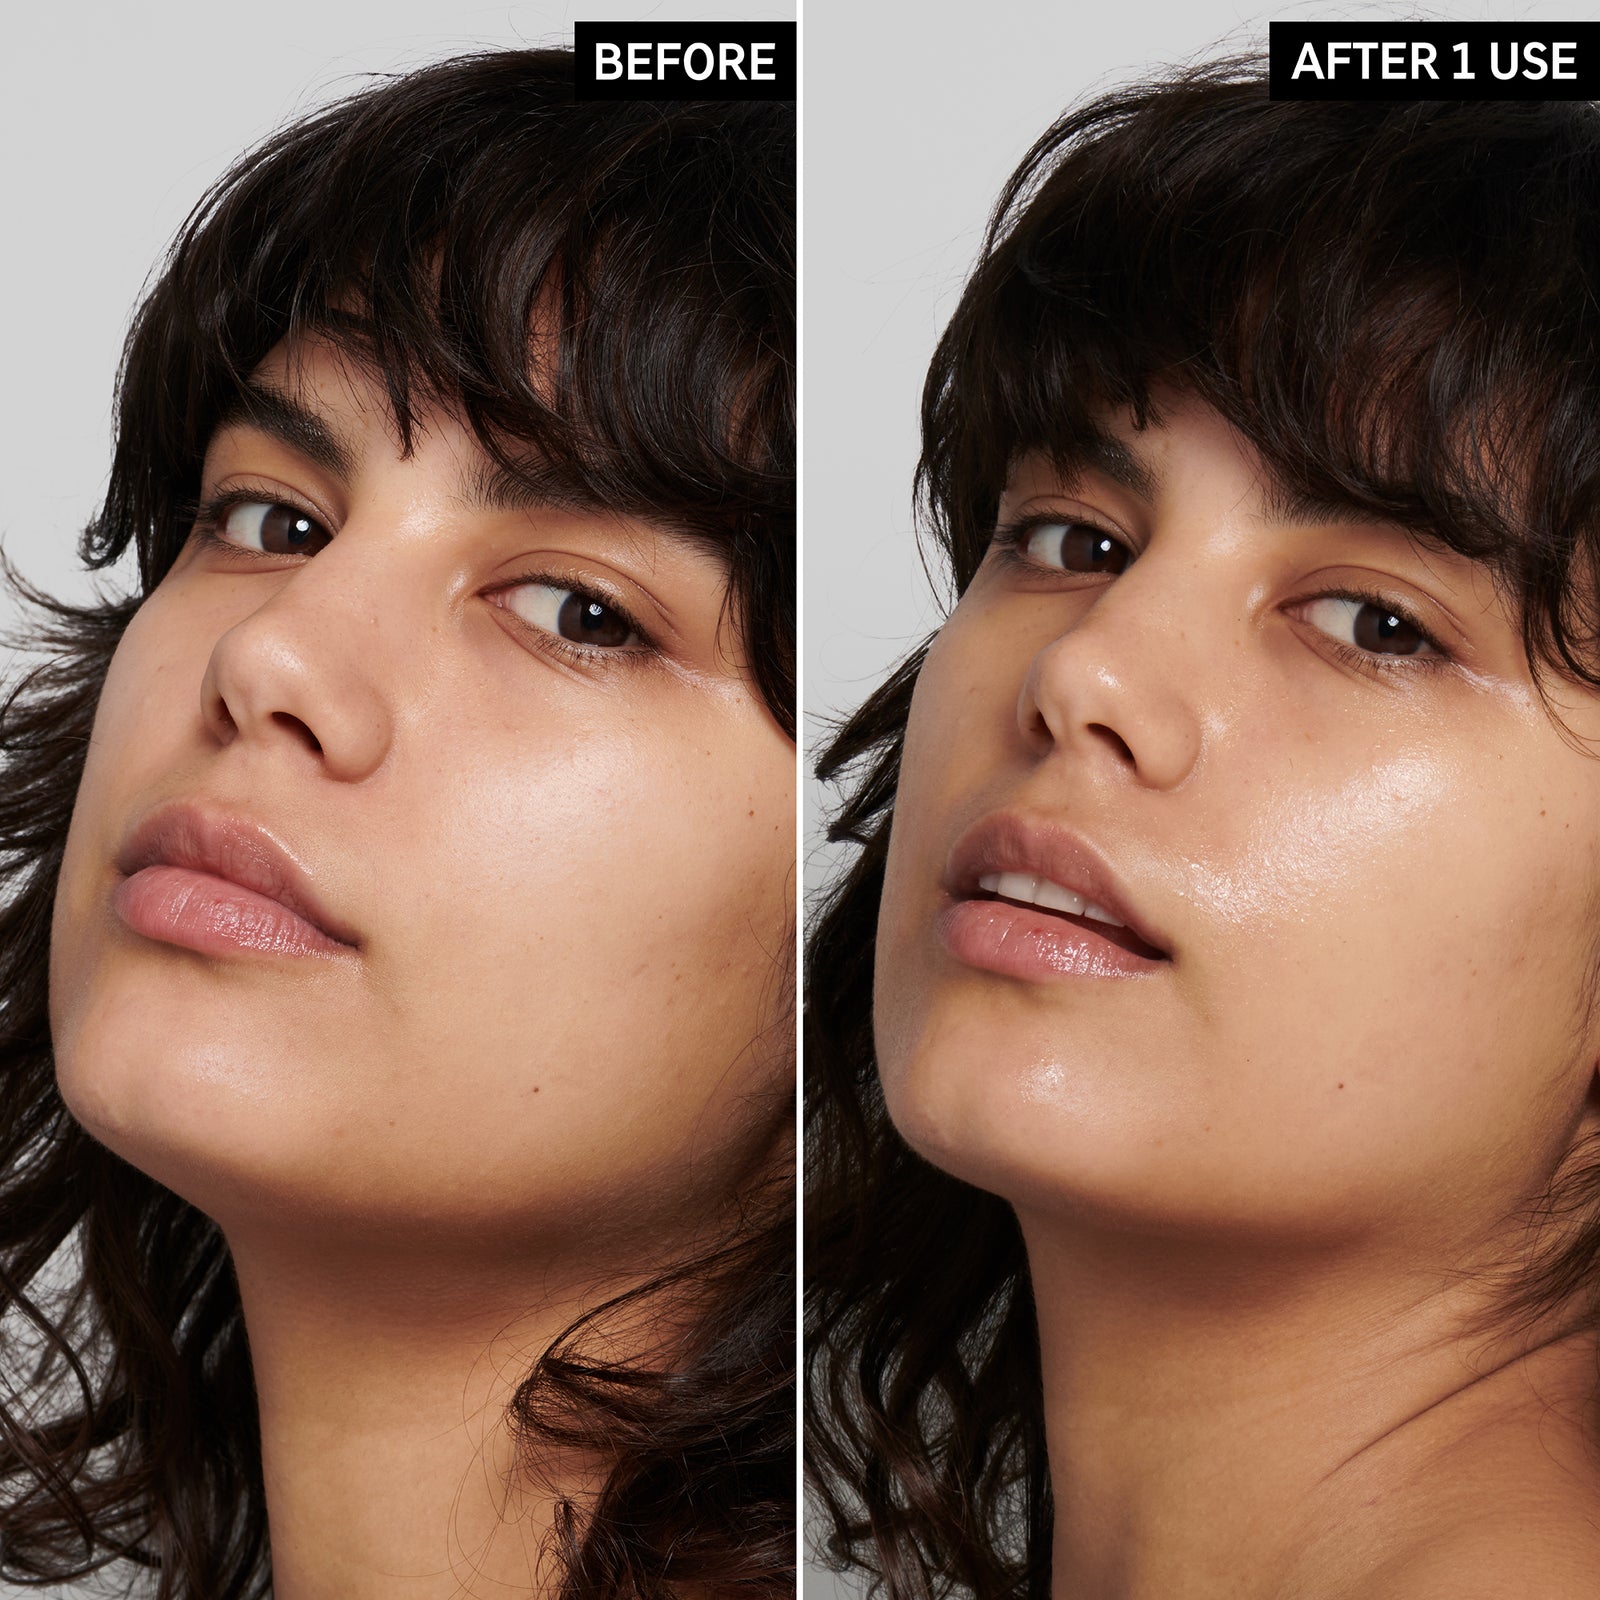 Two images of a female model's face side by side to show before and after using Polyglutamic Acid Serum